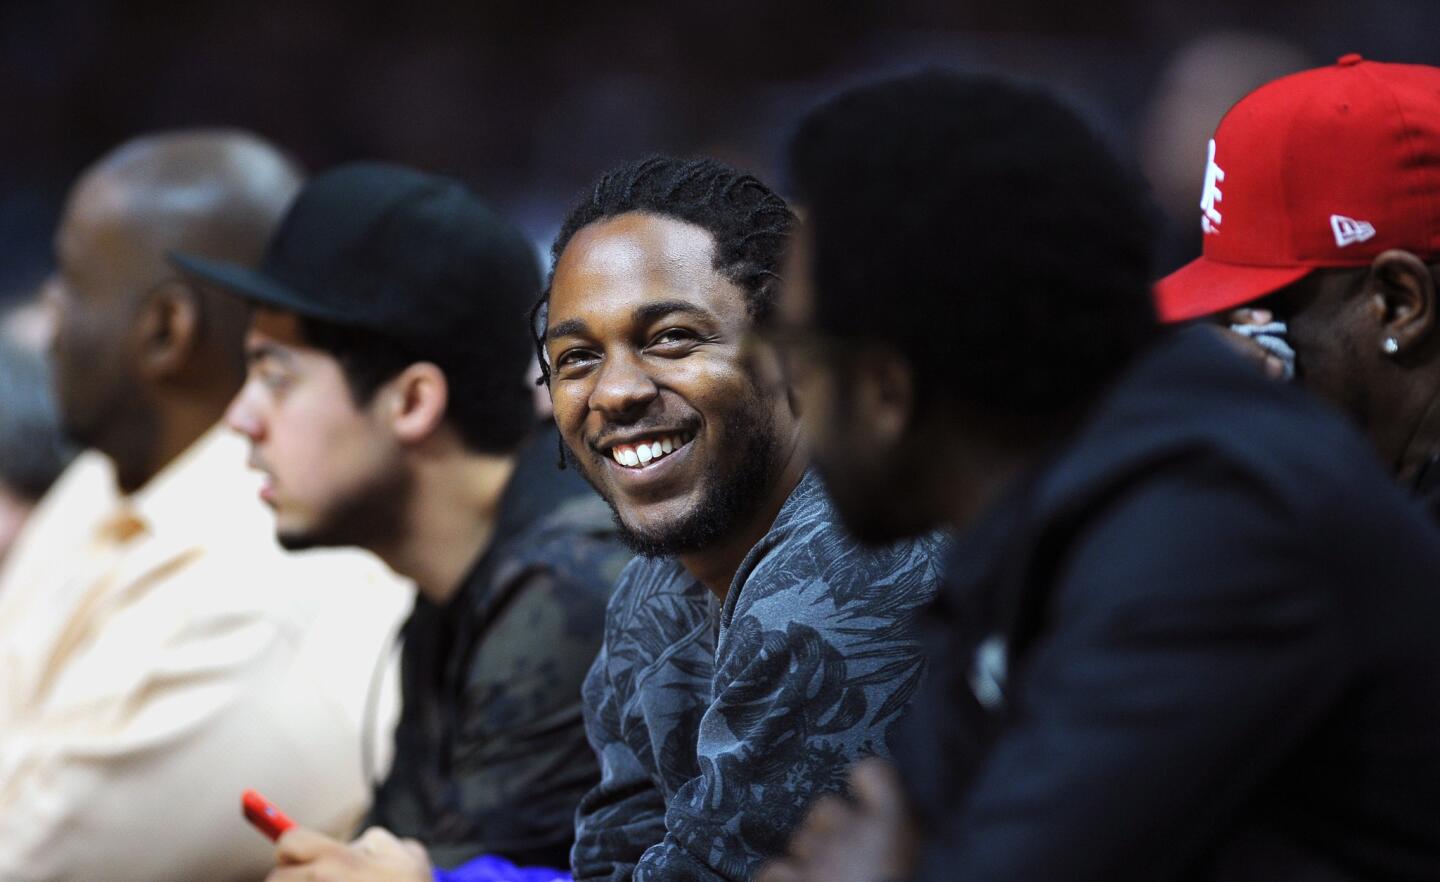 Rapper Kendrick Lamar sits courtside at the Clippers vs. Cavaliers game at Staples Center.